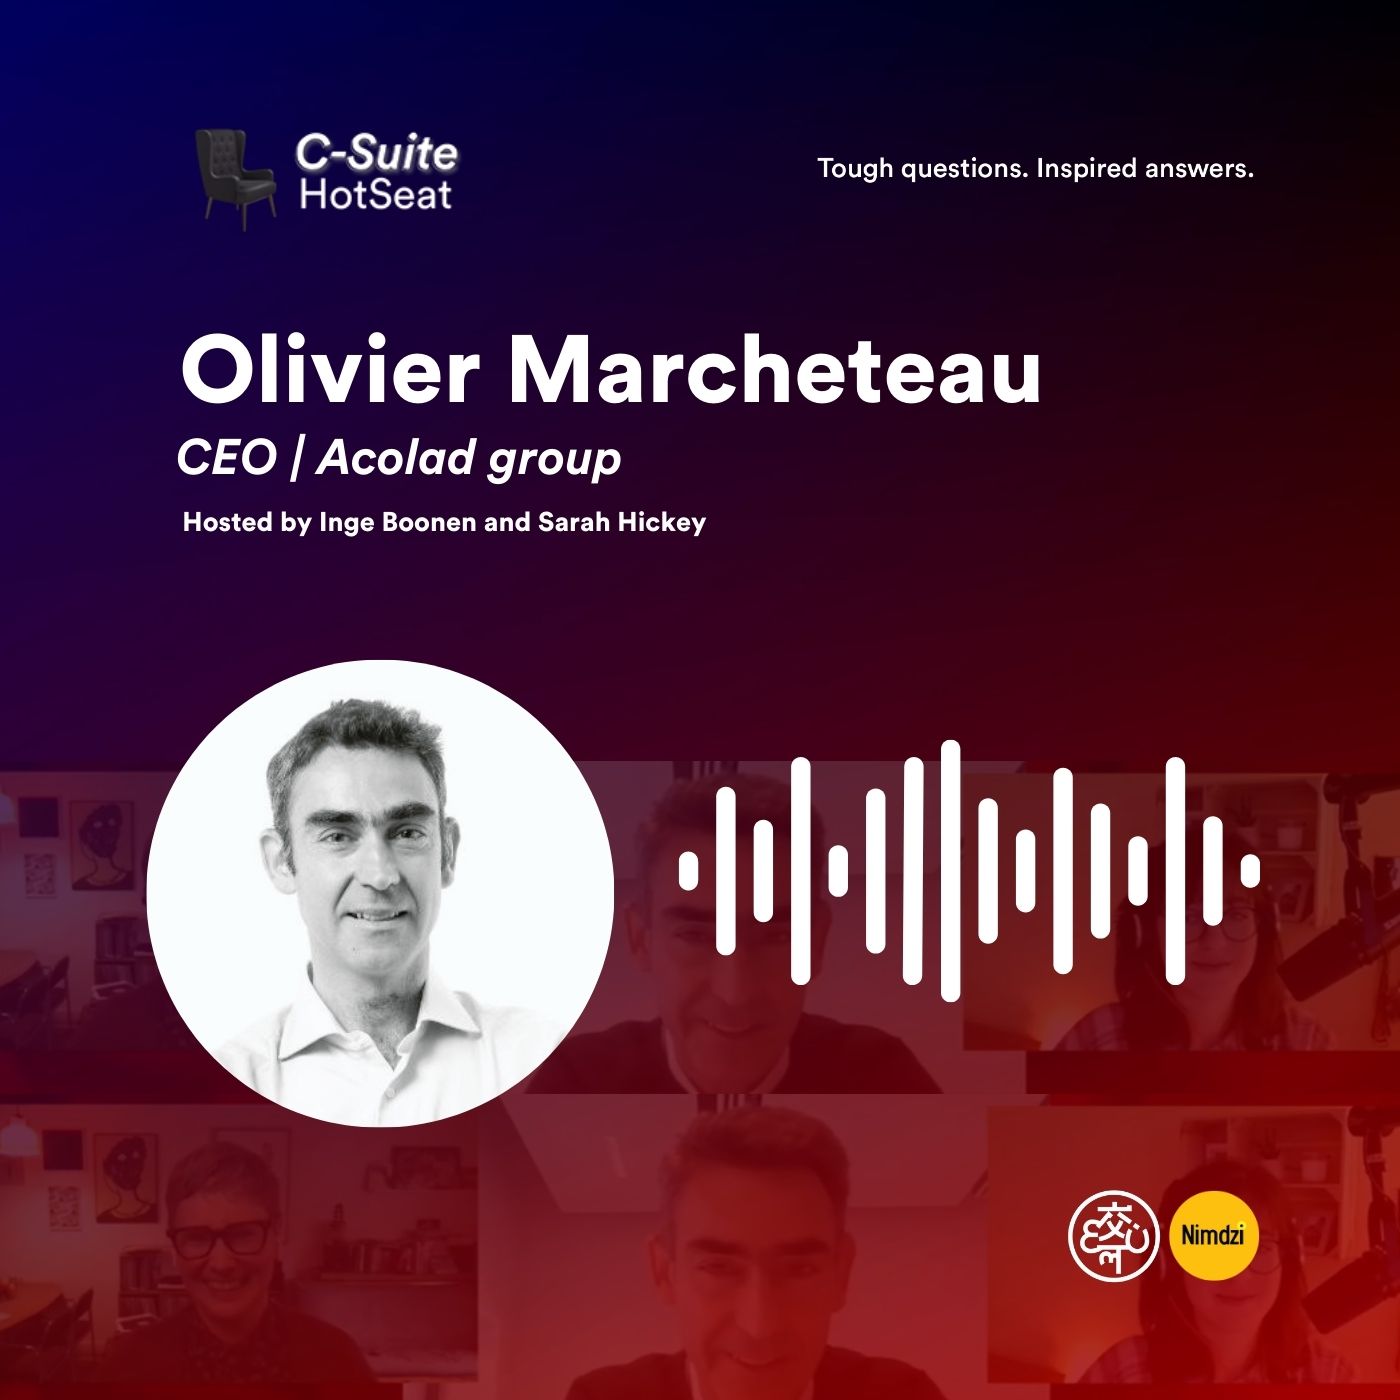 Finding Fun in Business with CEO Olivier Marcheteau |  C-Suite HotSeat E20